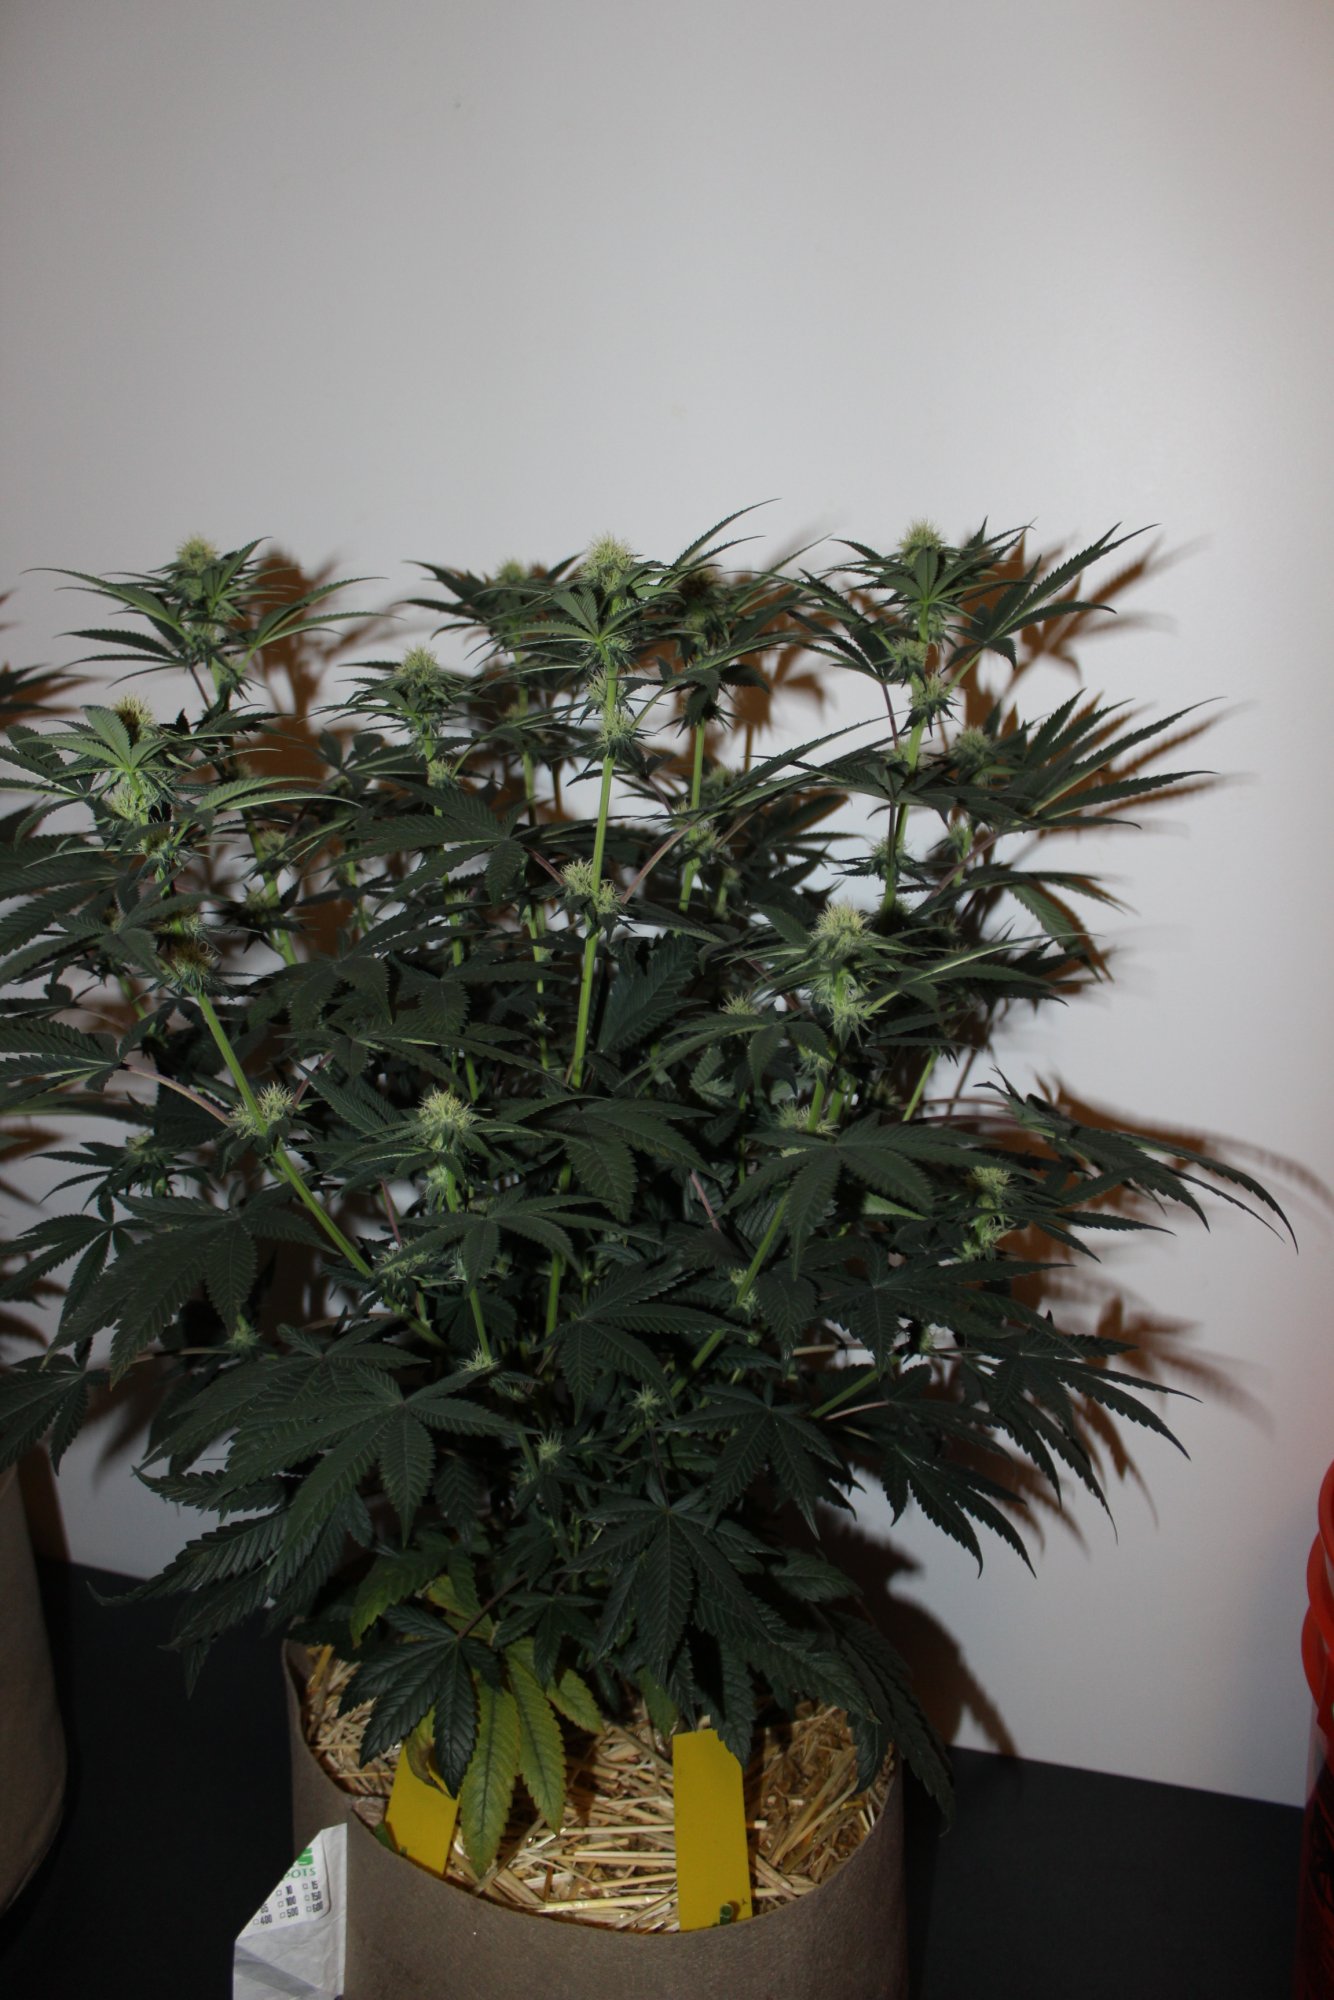 Time Bandit 4 flower day 21 1